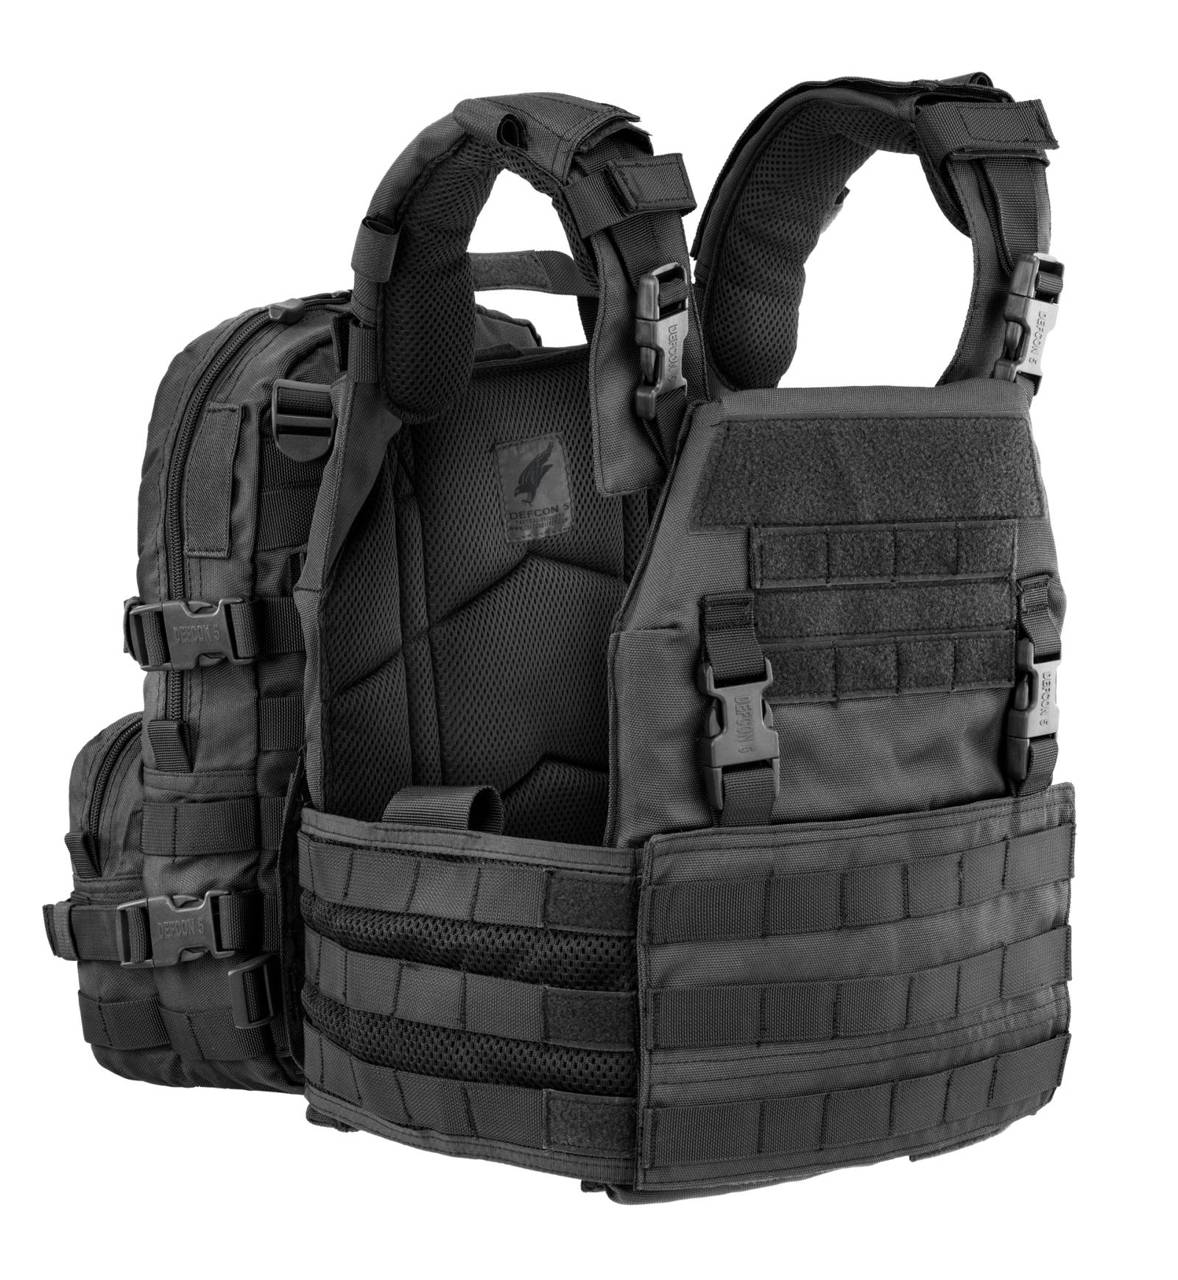 TACTICAL VEST FOR BALLISTIC PLATES - WITH INTEGRATED BACKPACK